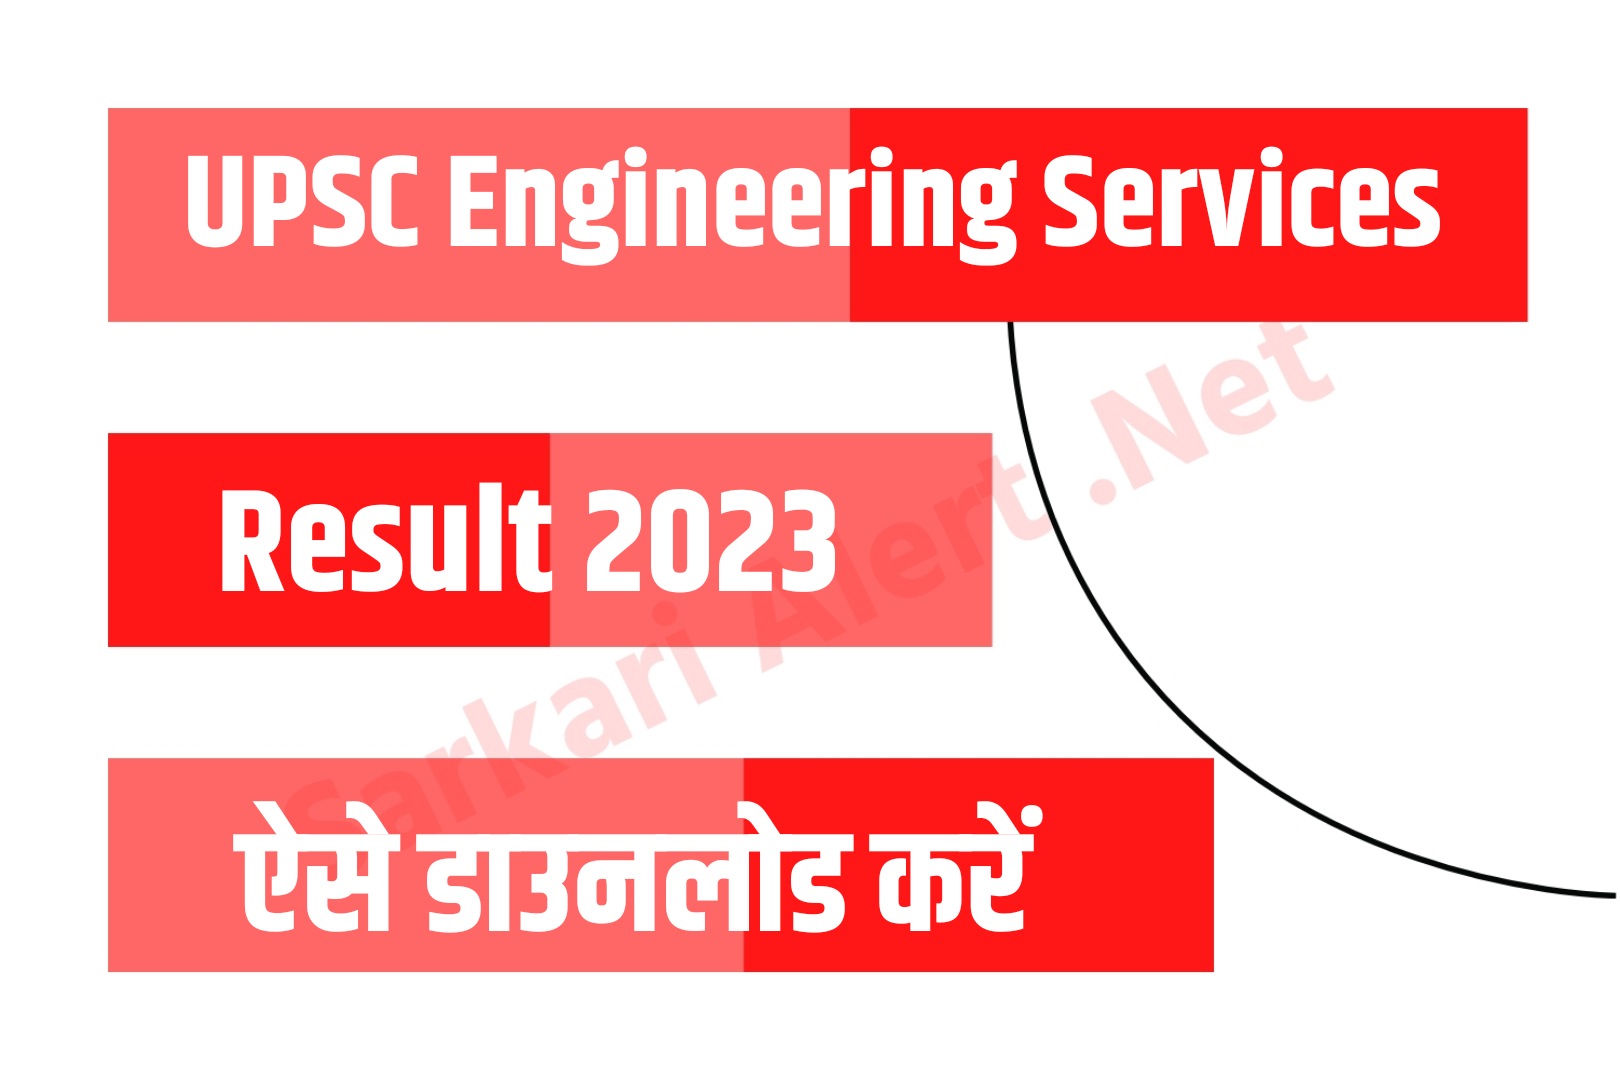 UPSC Engineering Services Main Result 2023